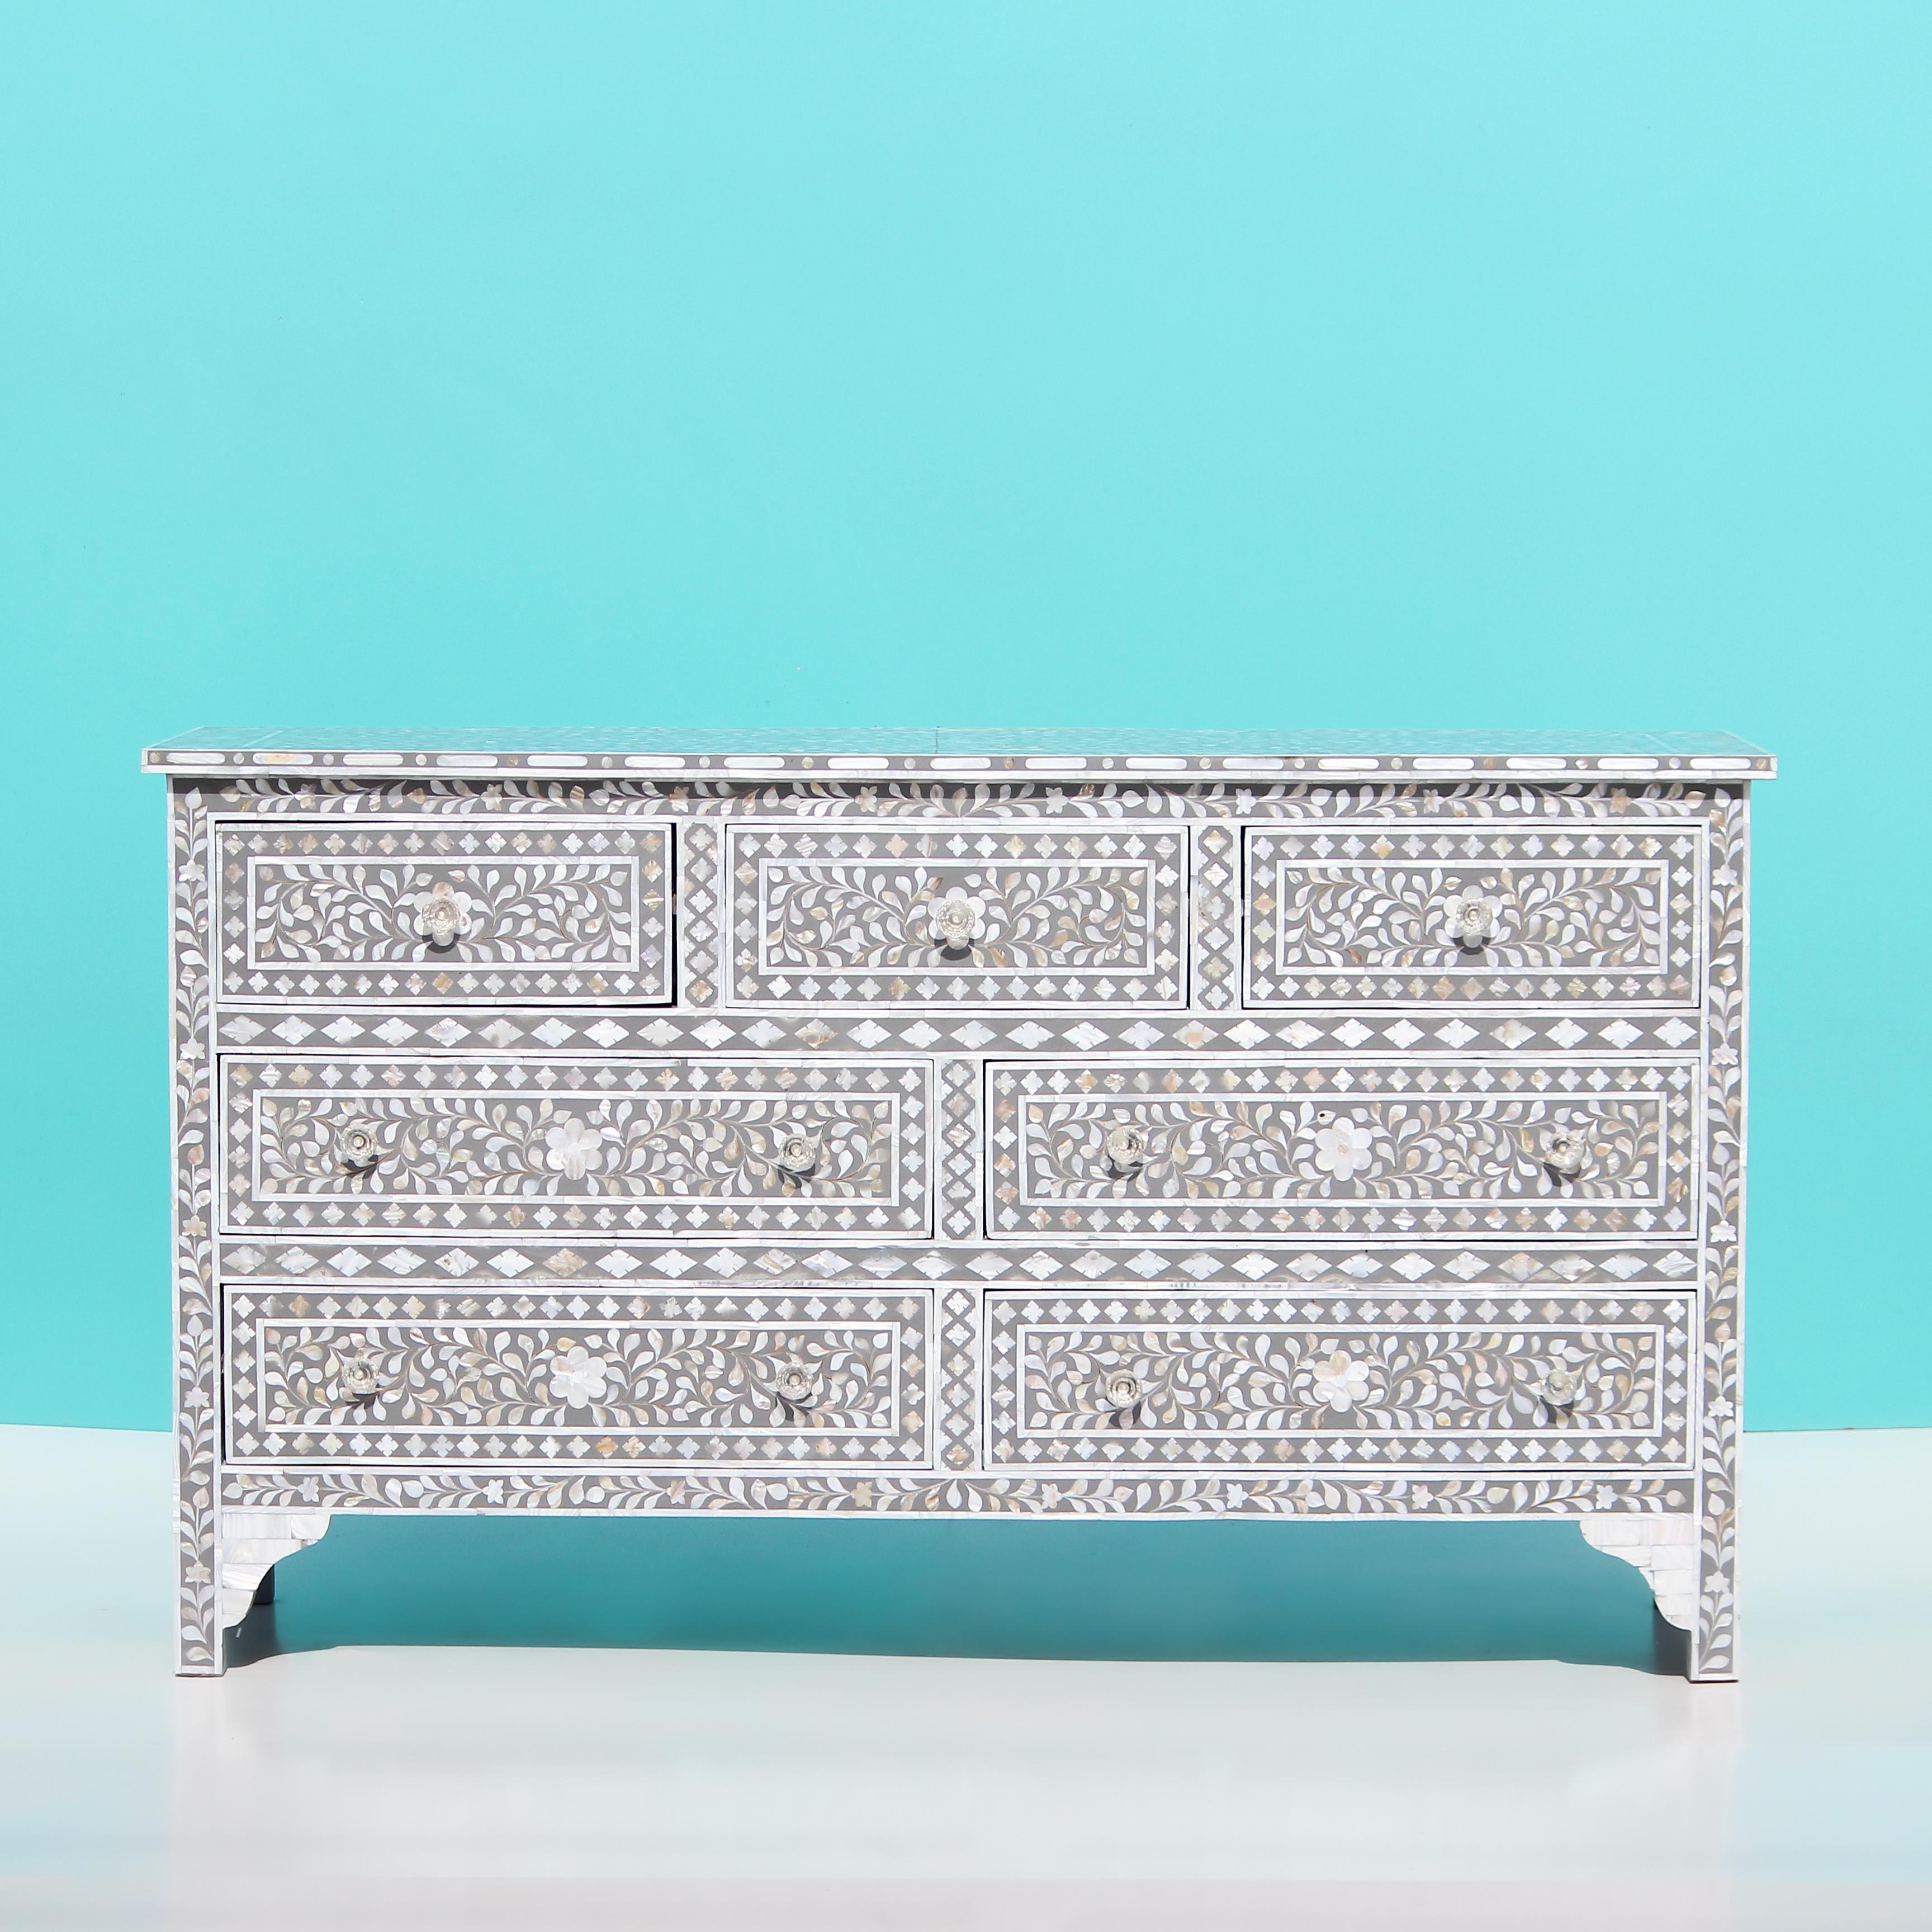 Introducing our exquisite Mother of Pearl Dresser, handmade with the finest small mother-of-pearl pieces through the age-old technique of inlay furniture making. This piece is reminiscent of the Bone inlay process and exudes a timeless quality